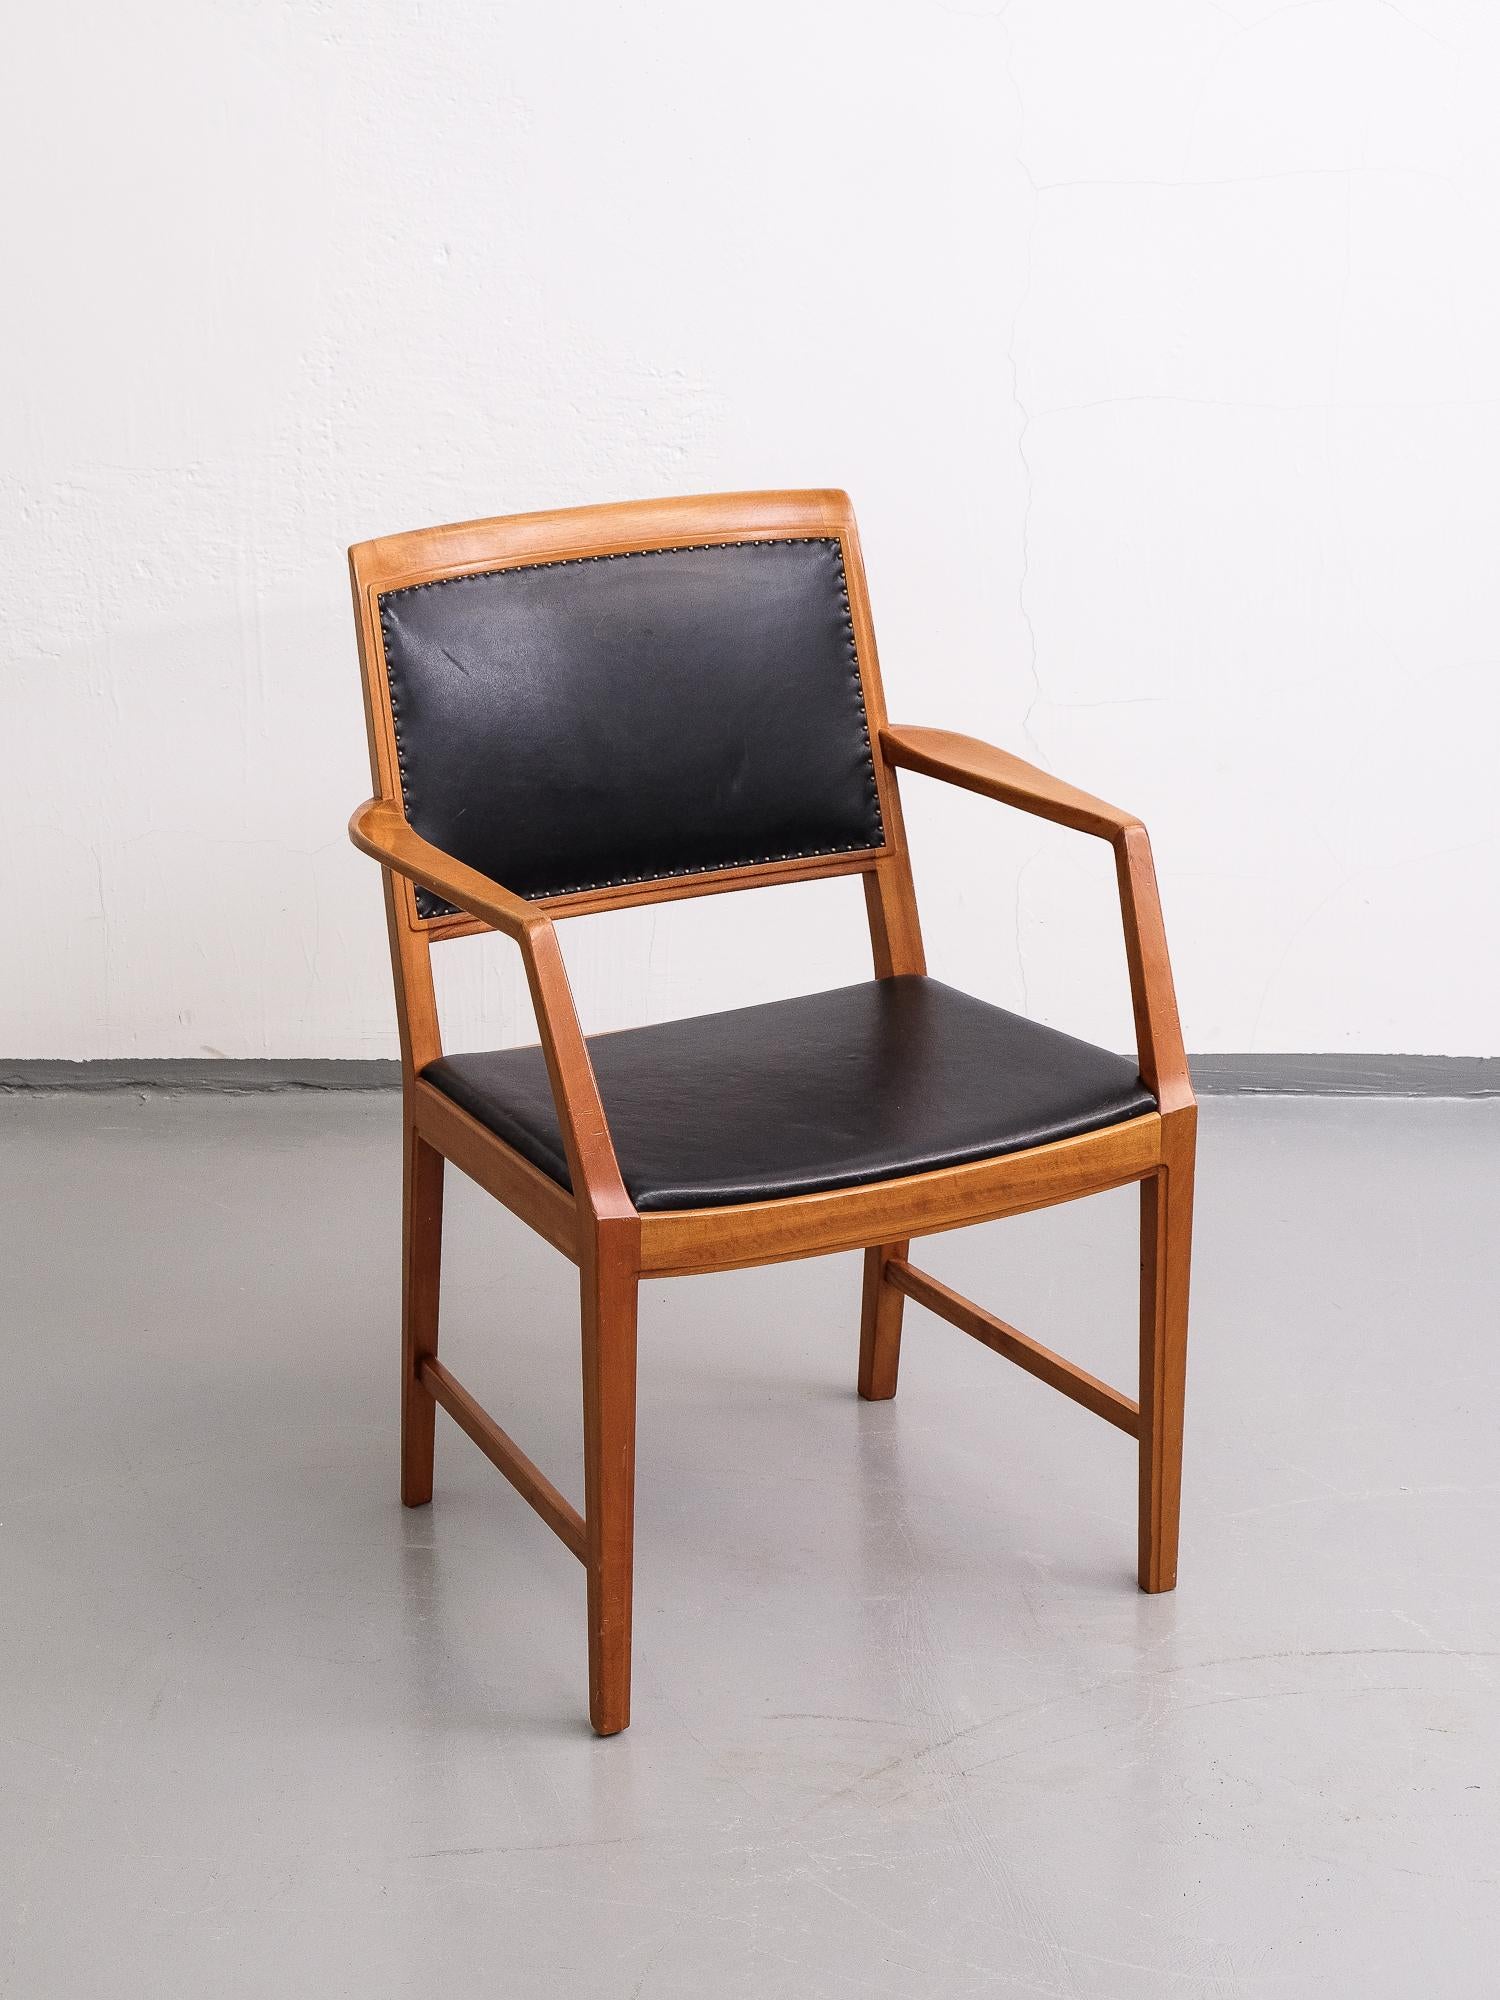 Armhair by Bertil Fridhagen, manufactured by Bodafors, 1950s. Upholstered with black leather, attached with decorative nails on the backrests. Original leather with patina.